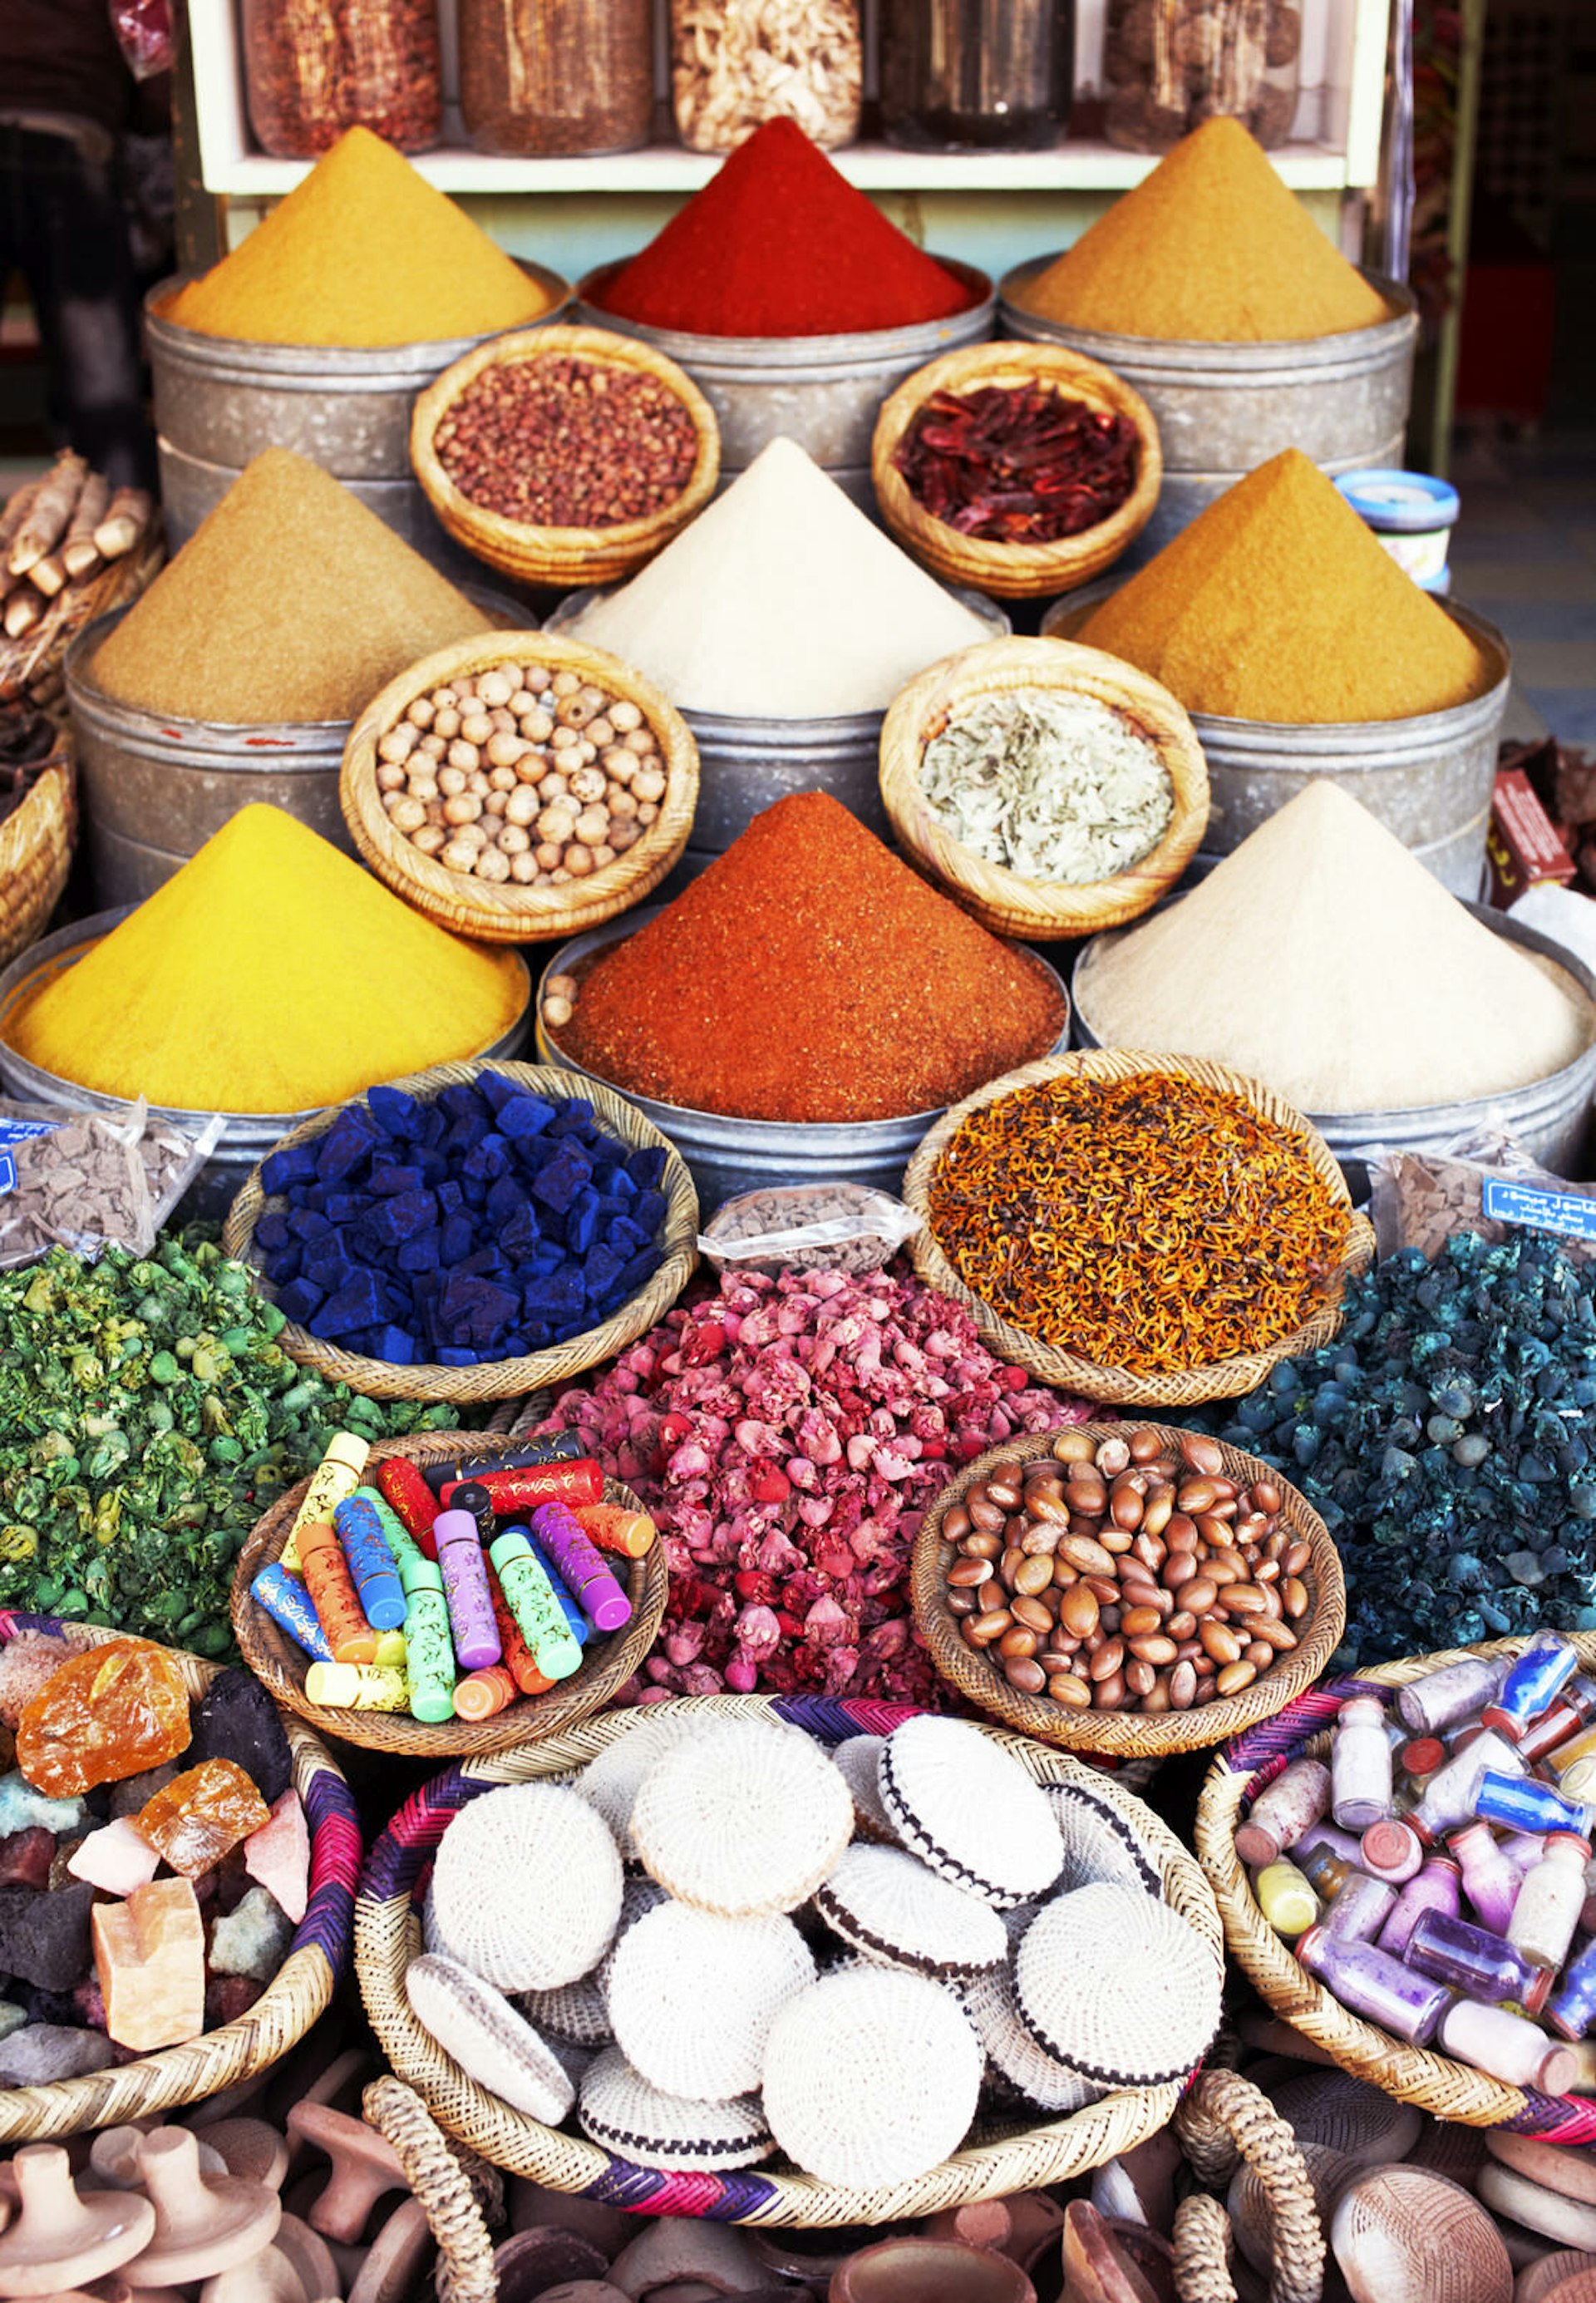 Display of various goods and spices in the market in Marrakesh, Morocco